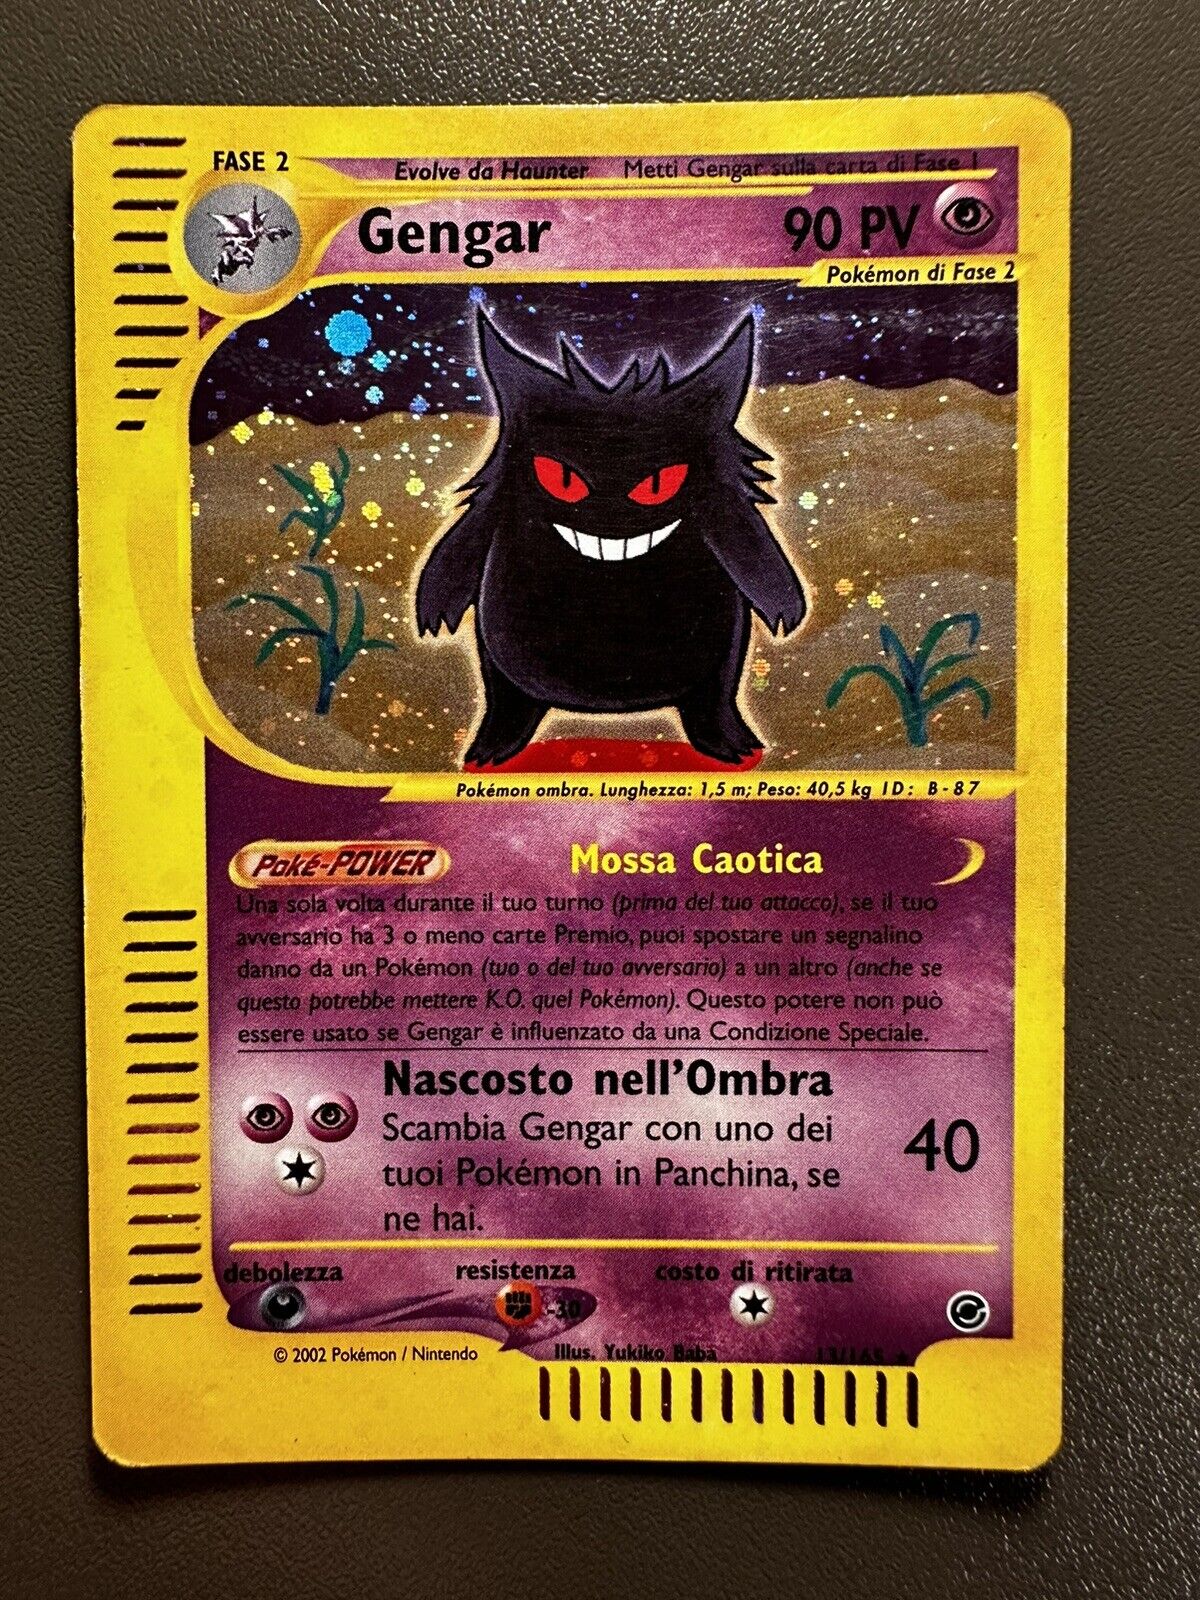 2002 Pokemon Card Gengar 13/165 Expedition Base Set Holo WOTC ITA EXCELLENT/GD